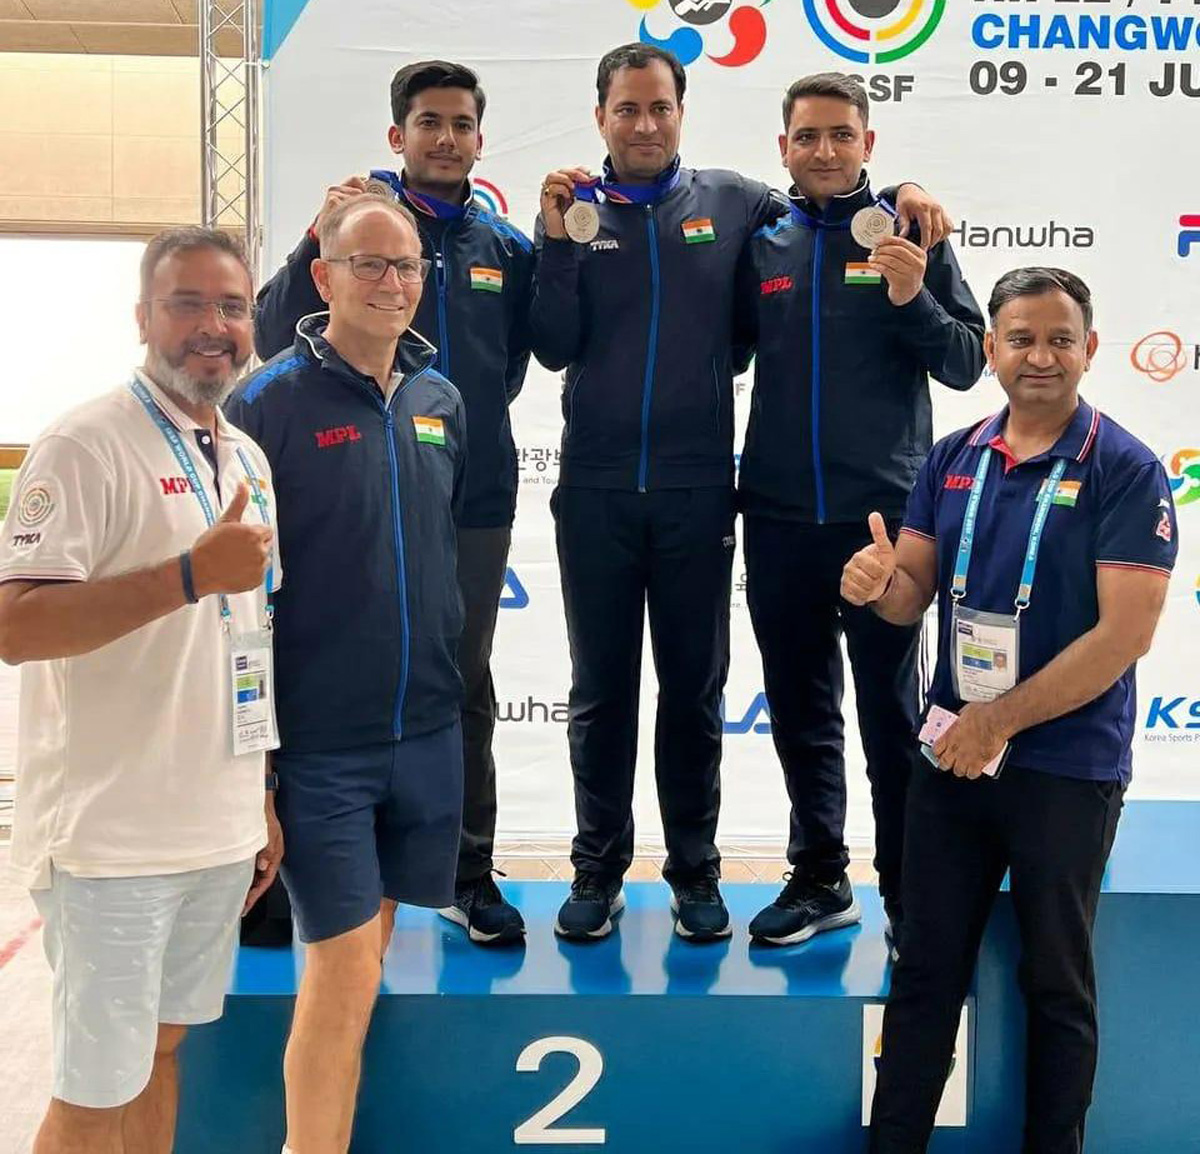 Chain Singh along with other shooters displaying Silver medals at Changwon in South Korea on Sunday.